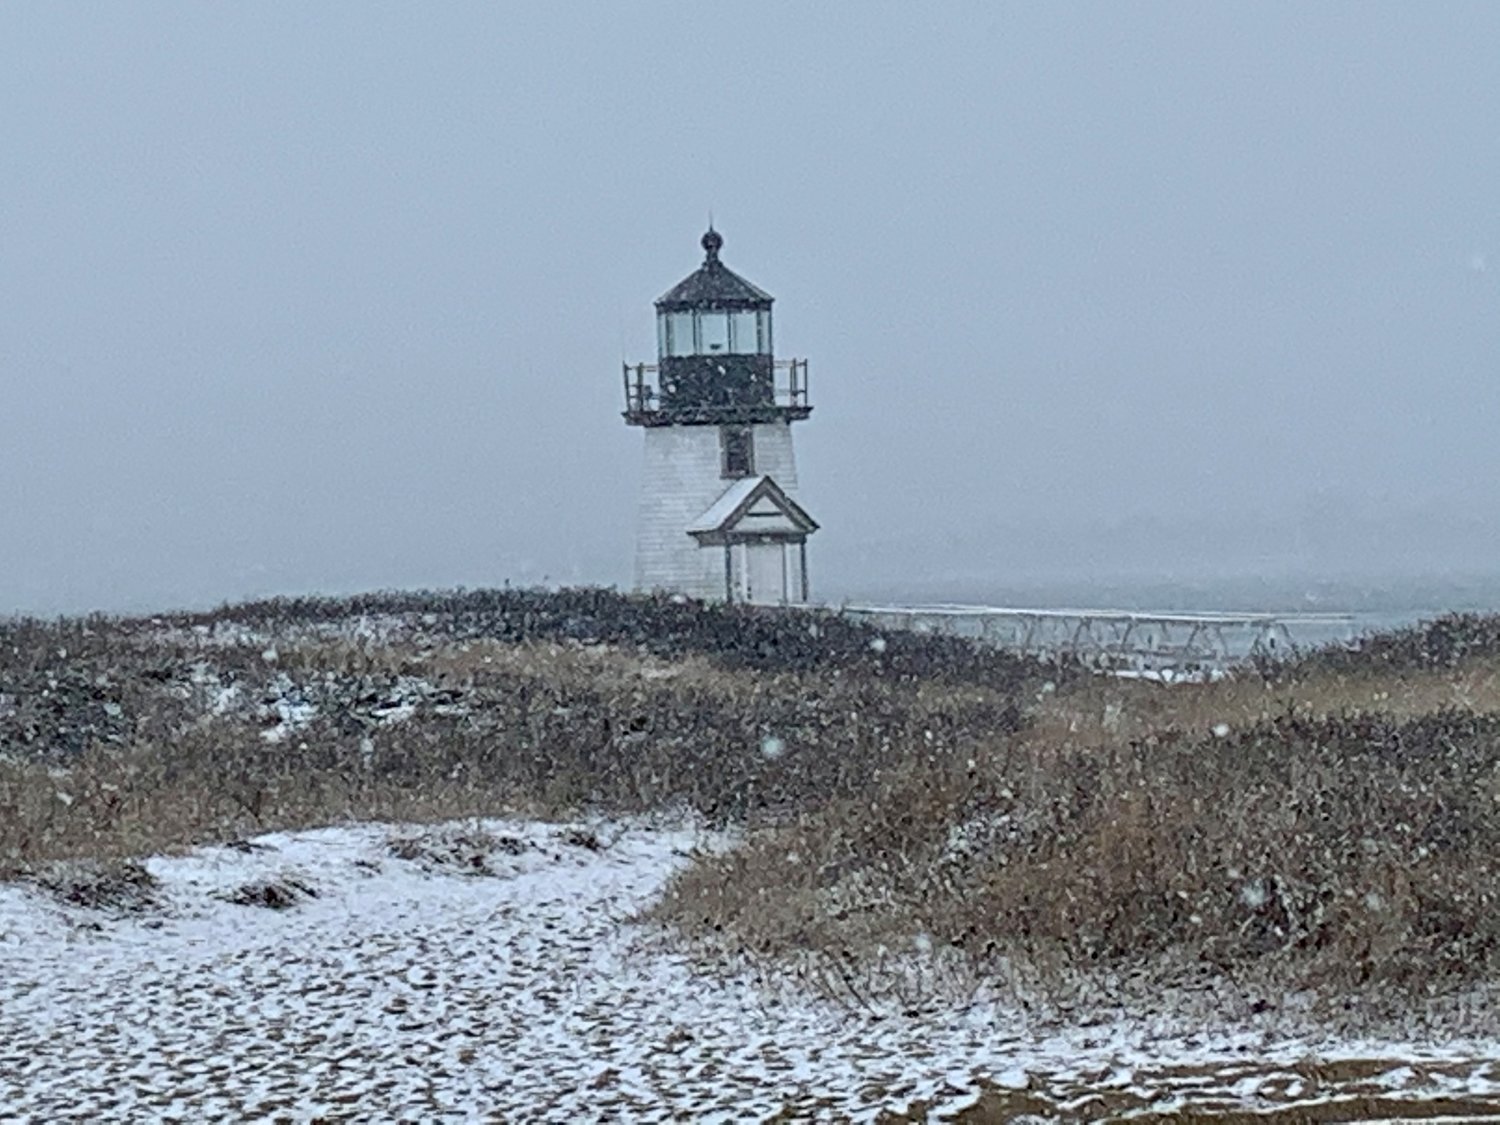 A dusting of snow at Brant Point.